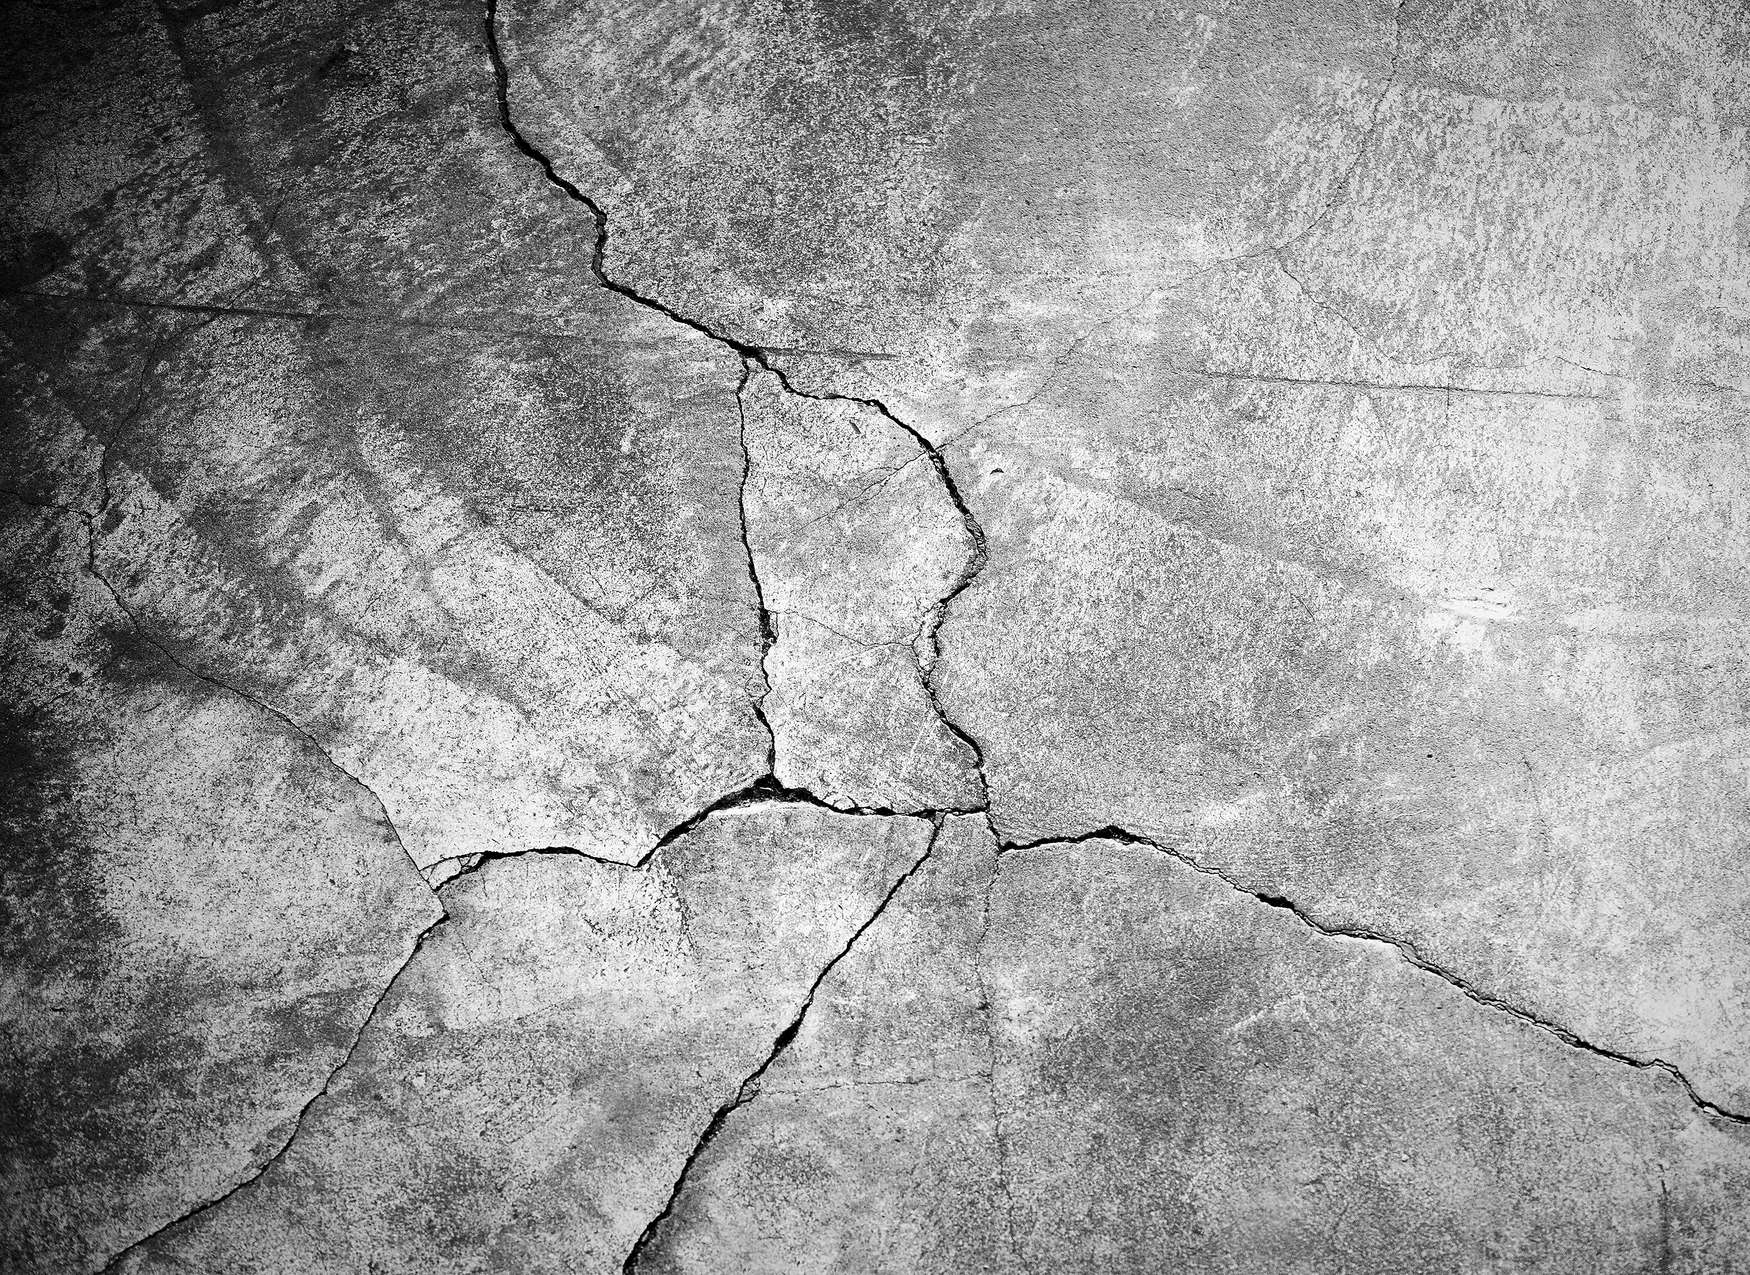             Photo wallpaper concrete wall with crack in 3D optics - grey
        